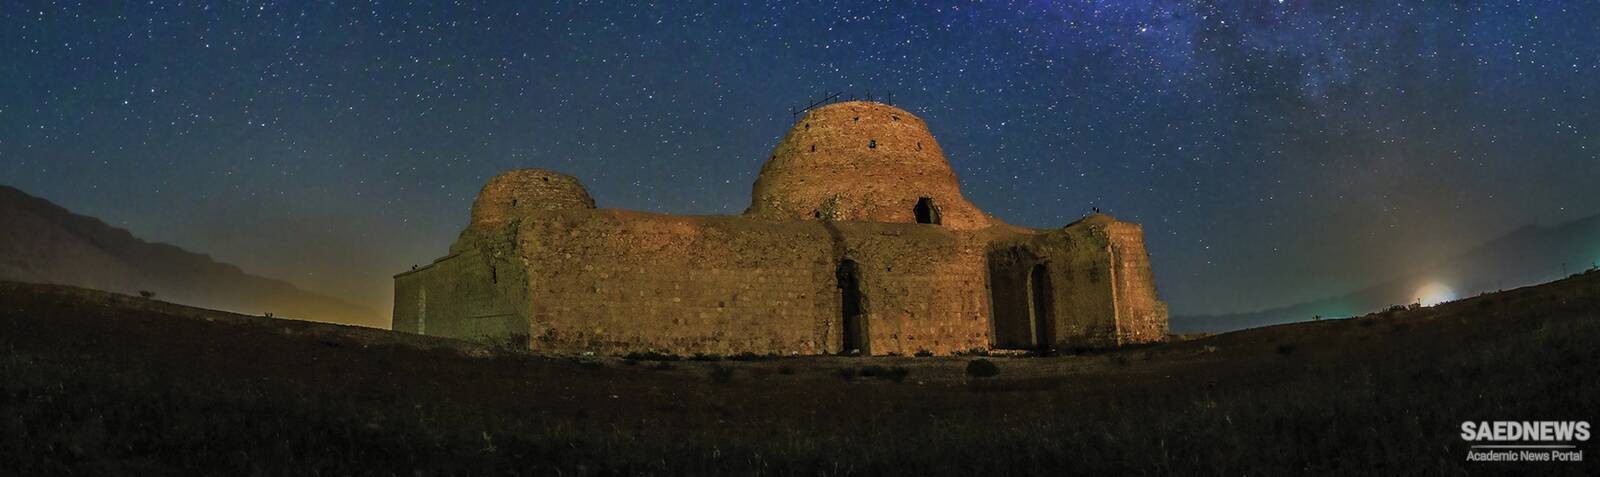 Sarvestan Palace the Sleeping Beauty in Fars Province